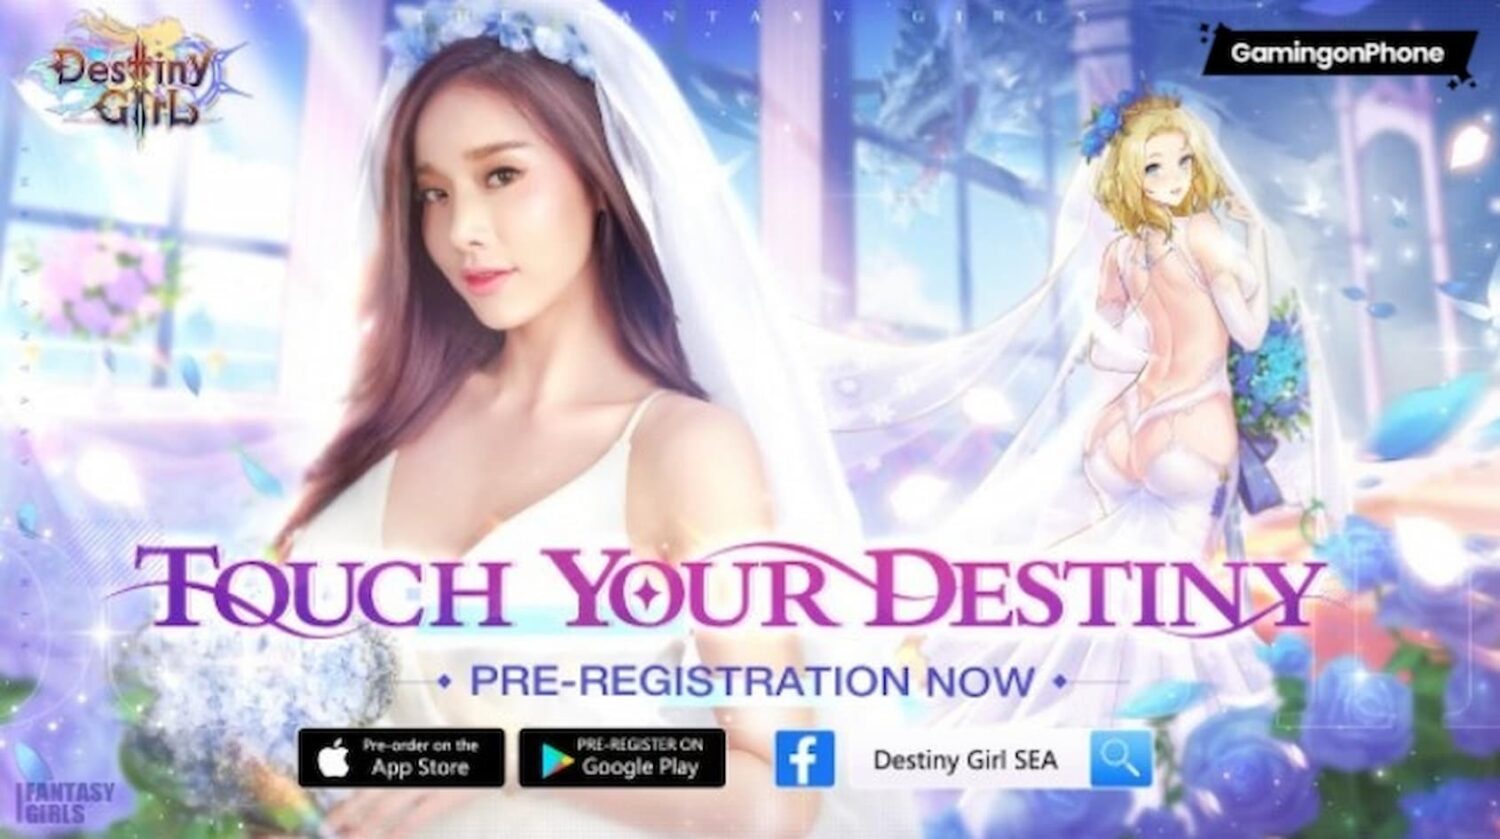 Mookpichana Sex Video - Destiny Girl showcased its first promotional teaser with Mook Pichana ahead  of its release